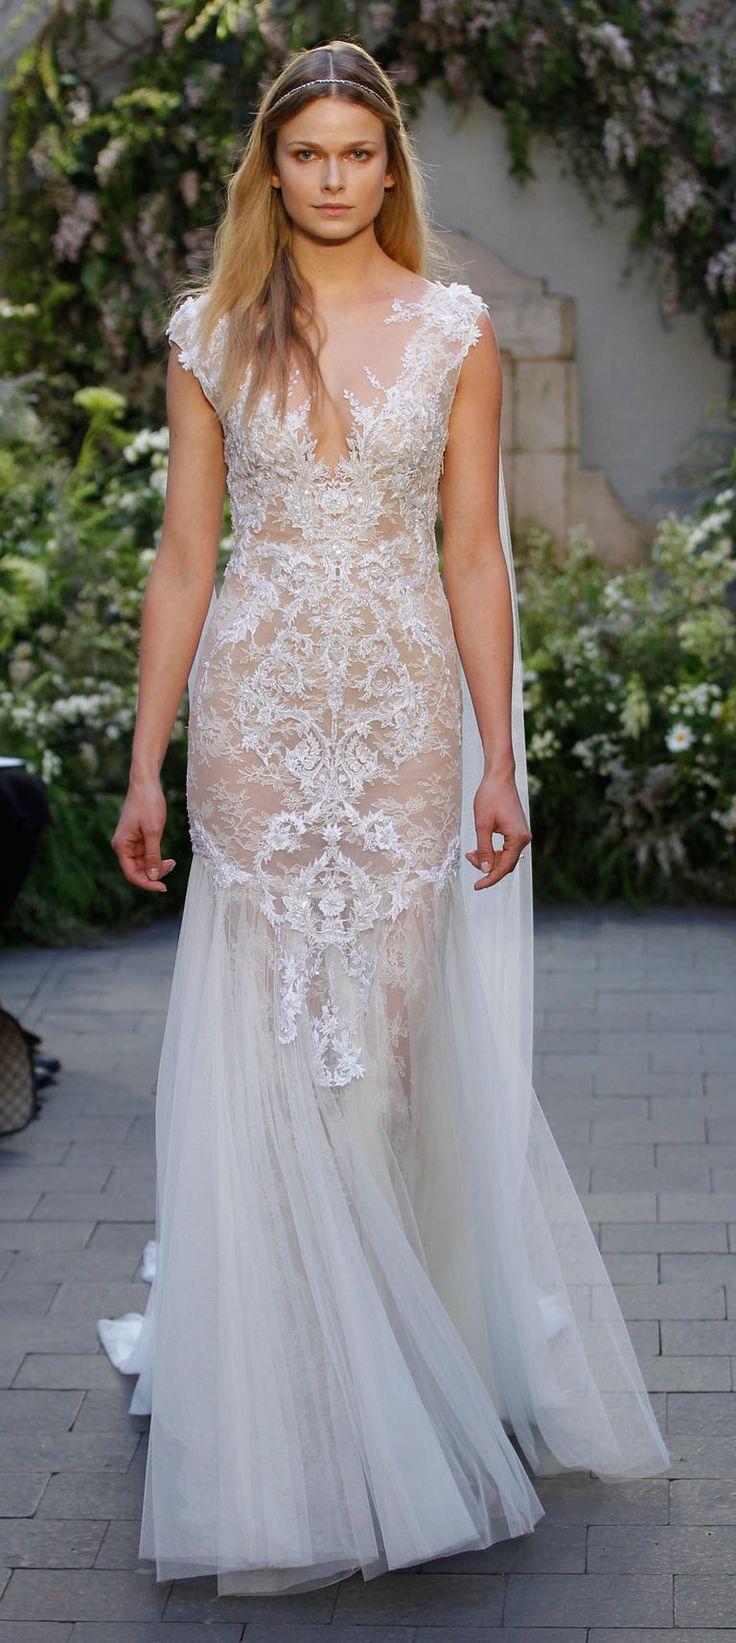 Wedding - Monique Lhuillier Stuns With Lingerie-Inspired Wedding Dresses And Pops Of Pastels